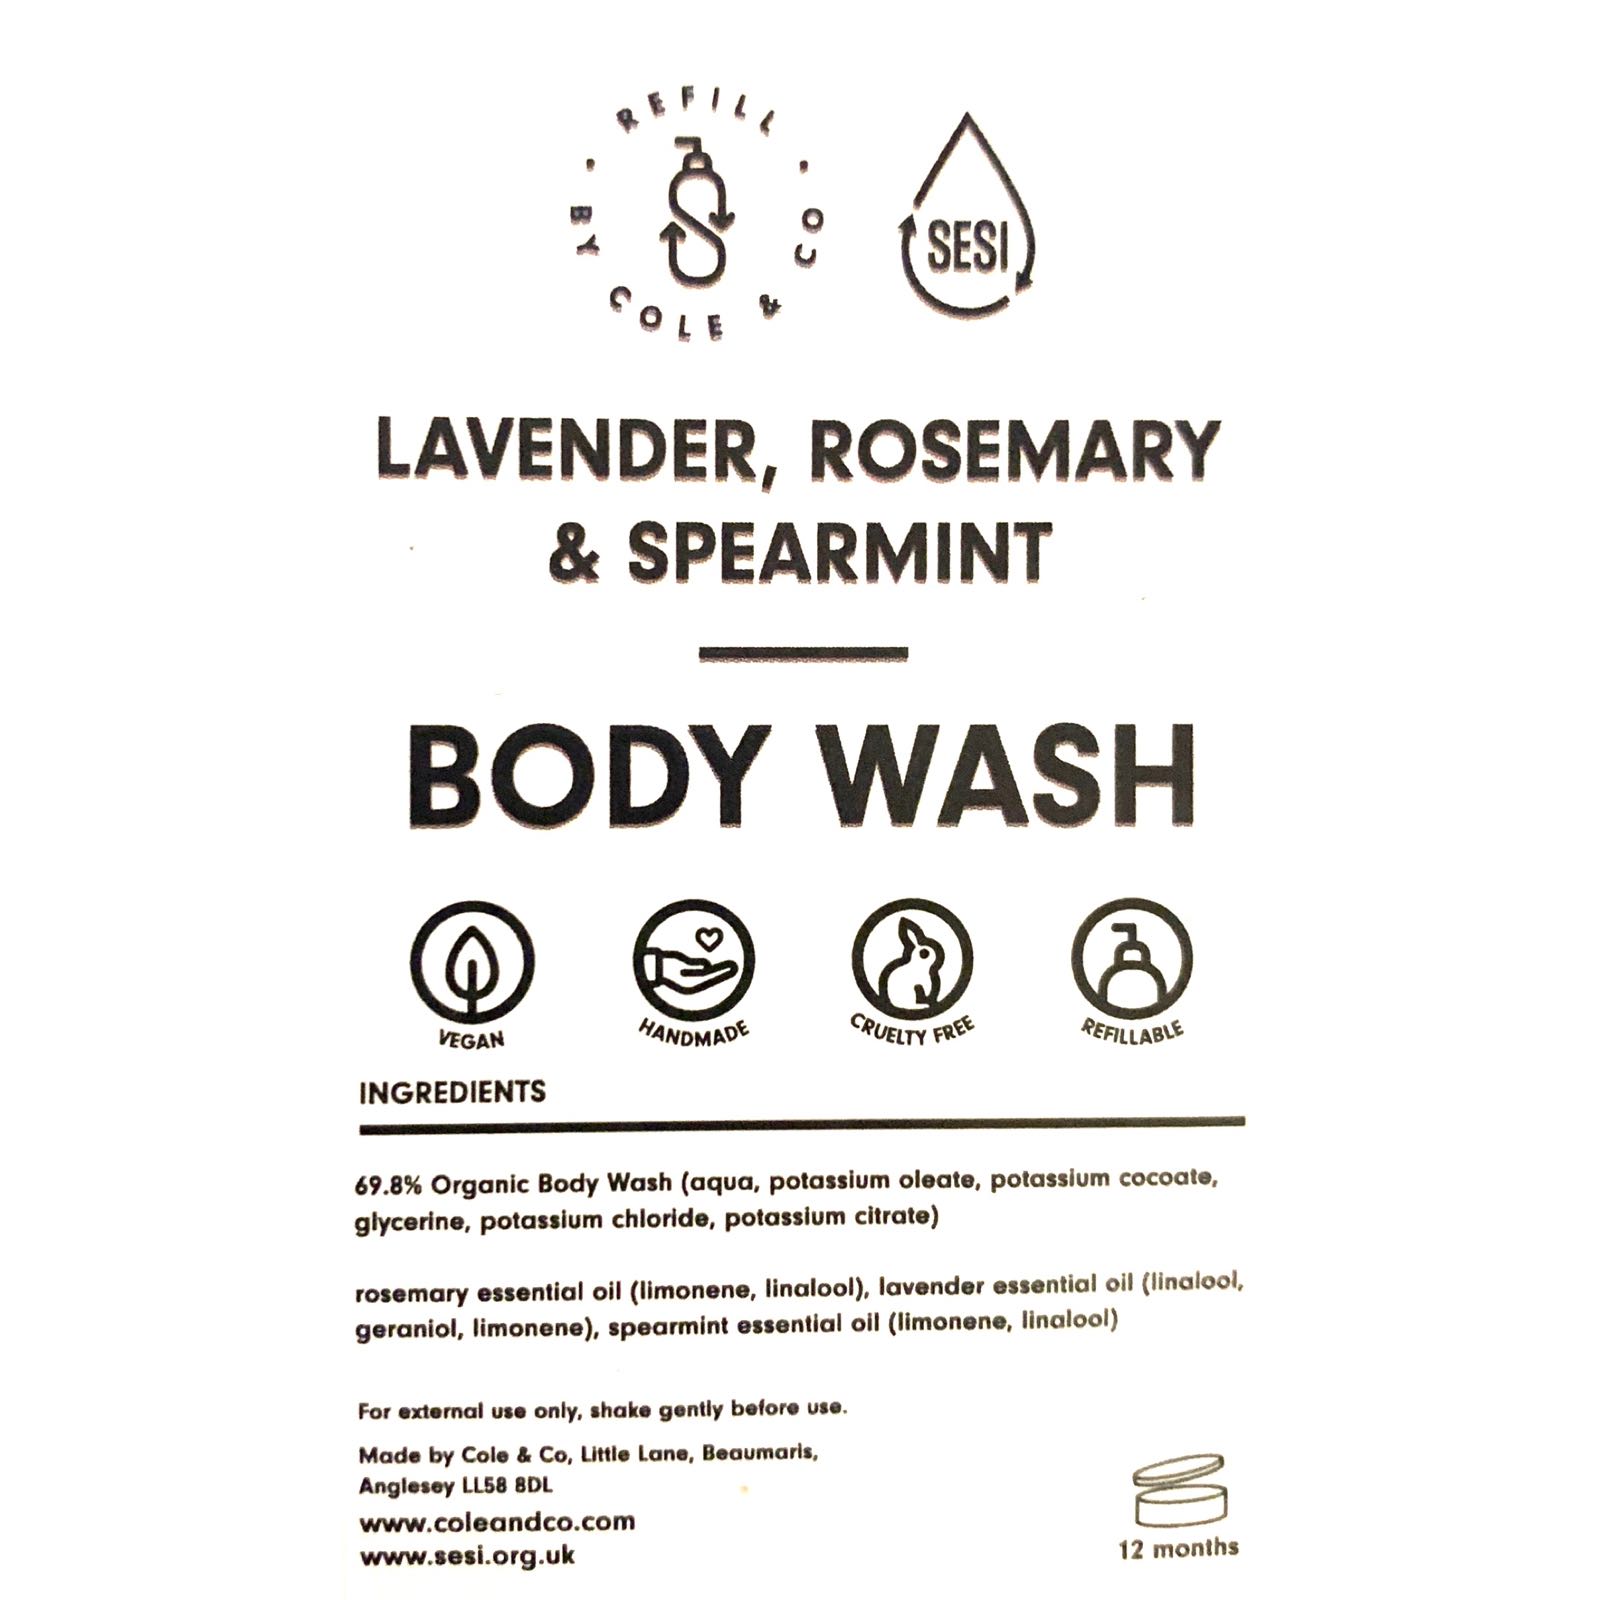 Body Wash in Lavender, Rosemary & Spearmint | Cole & Co